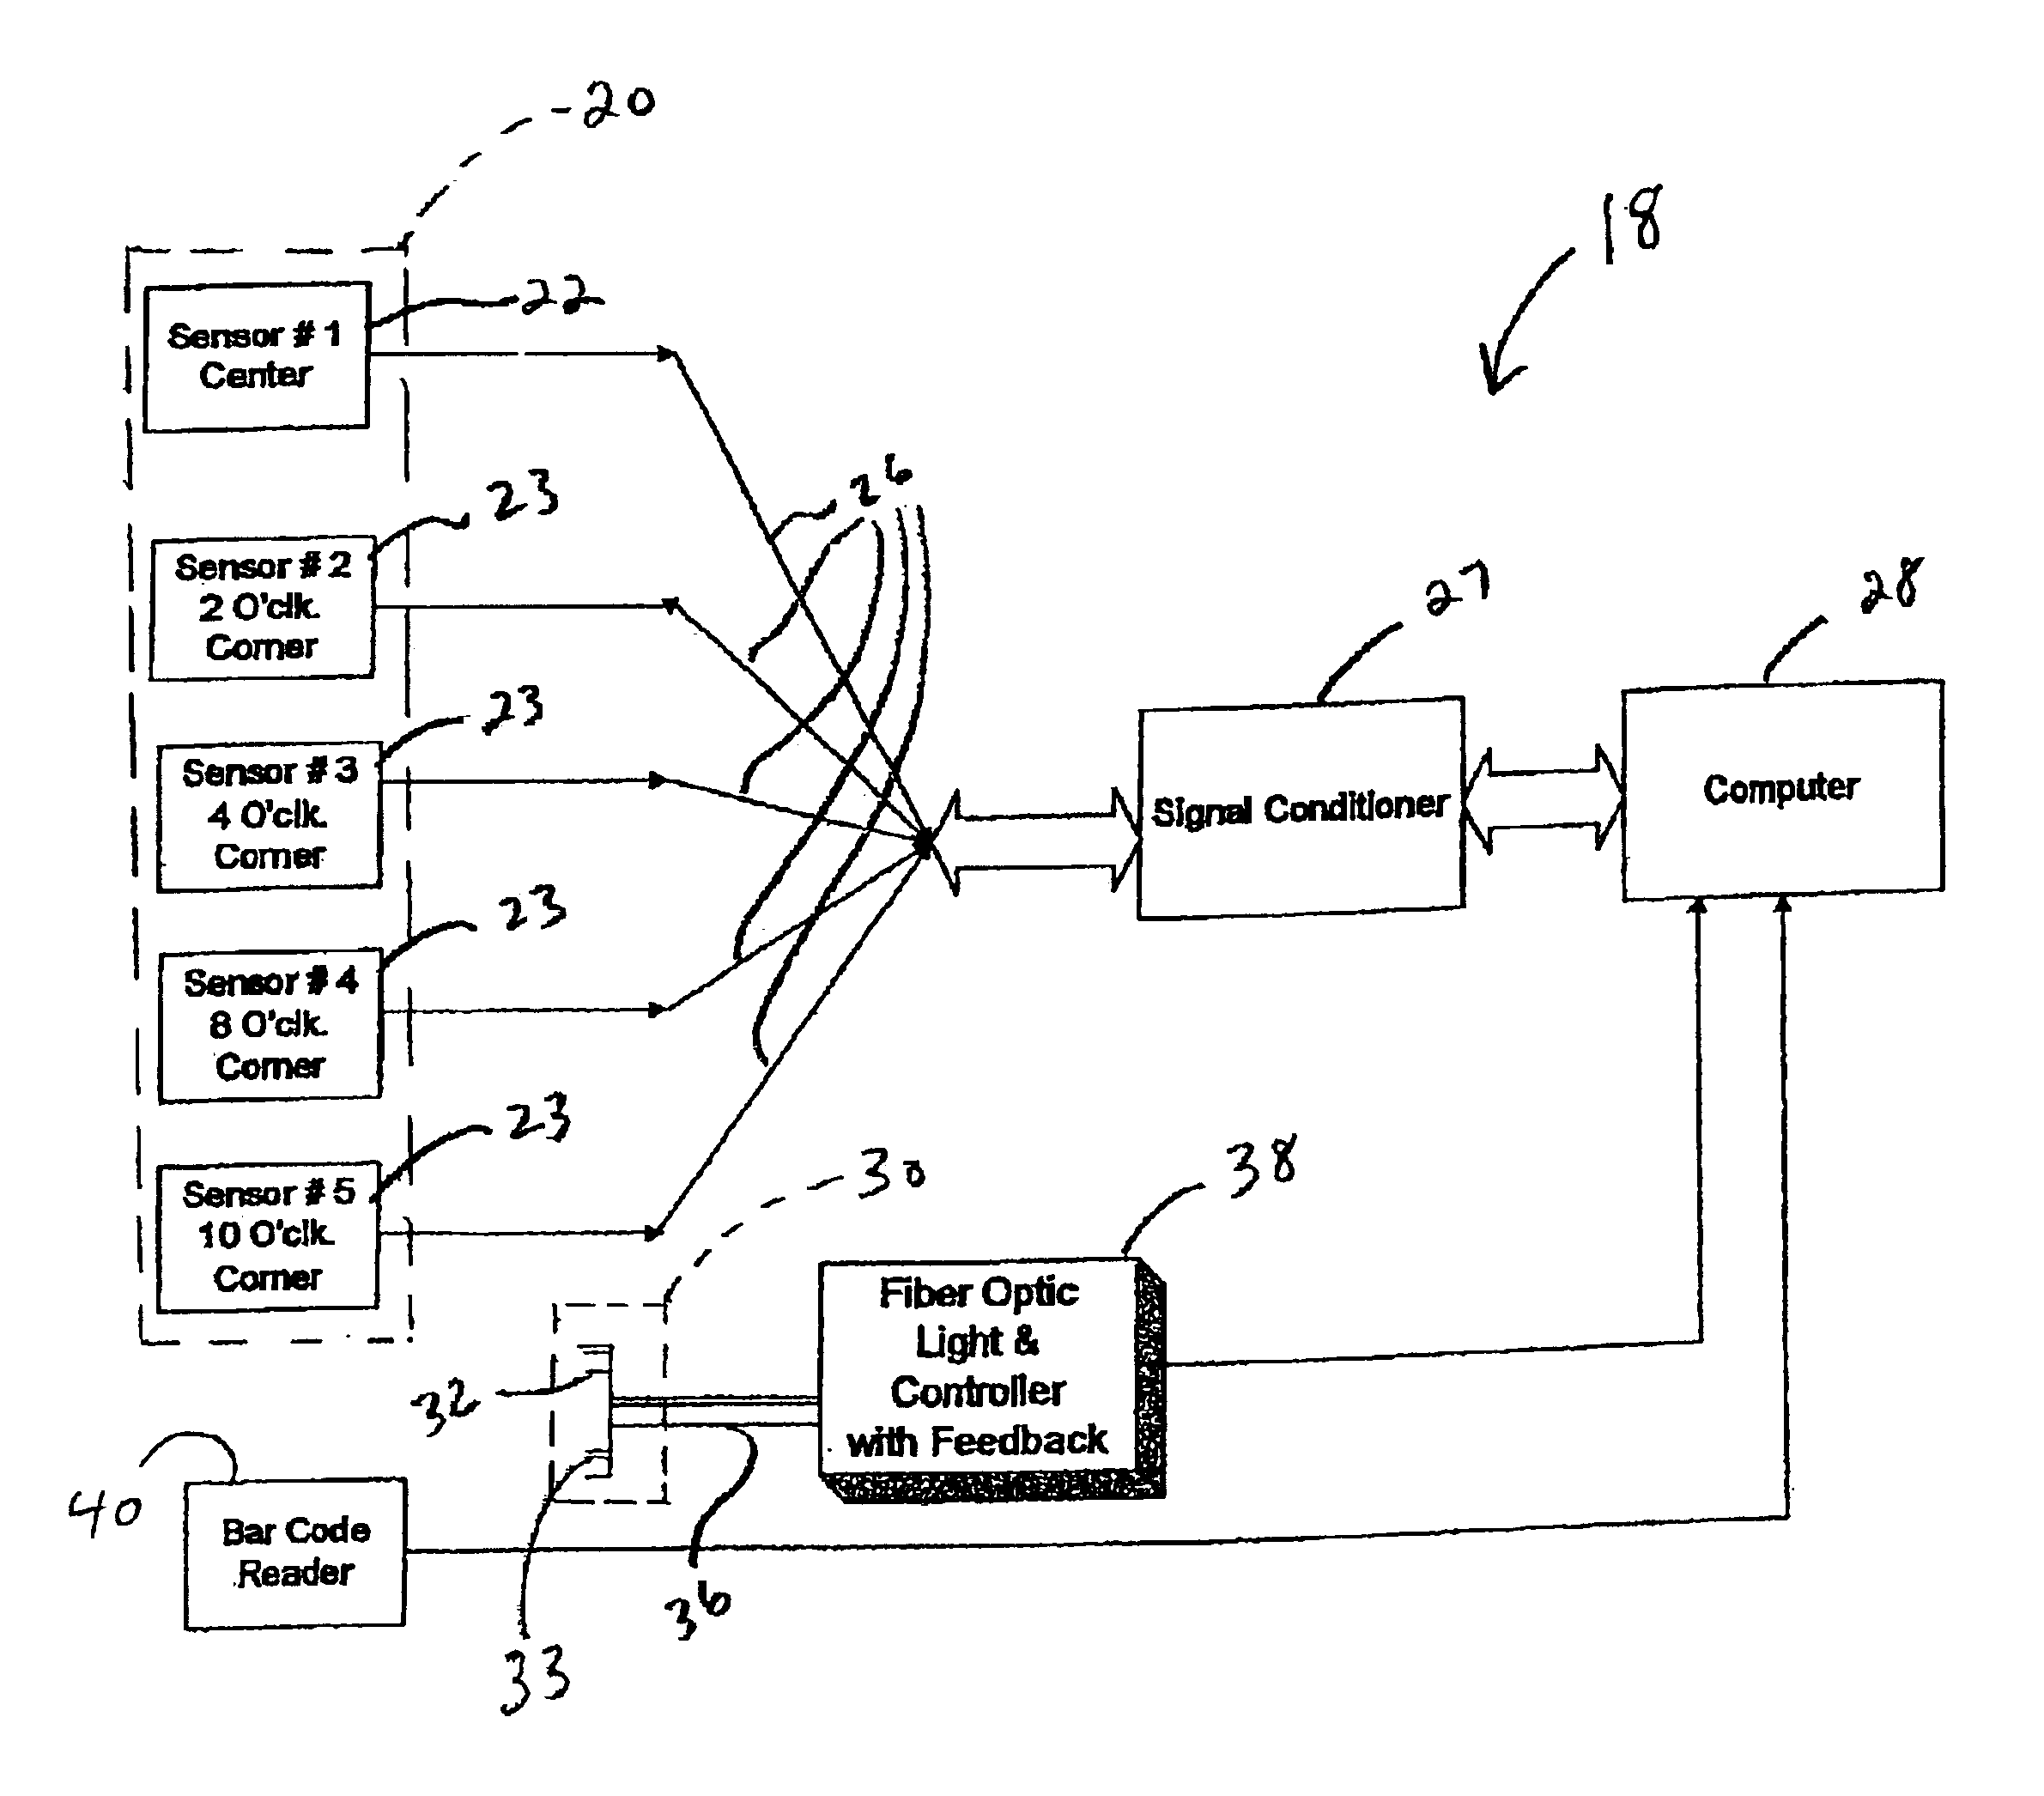 Apparatus and method for monitoring of cathode ray tube panel manufacturing to reduce CRT cost and improve performance and yield